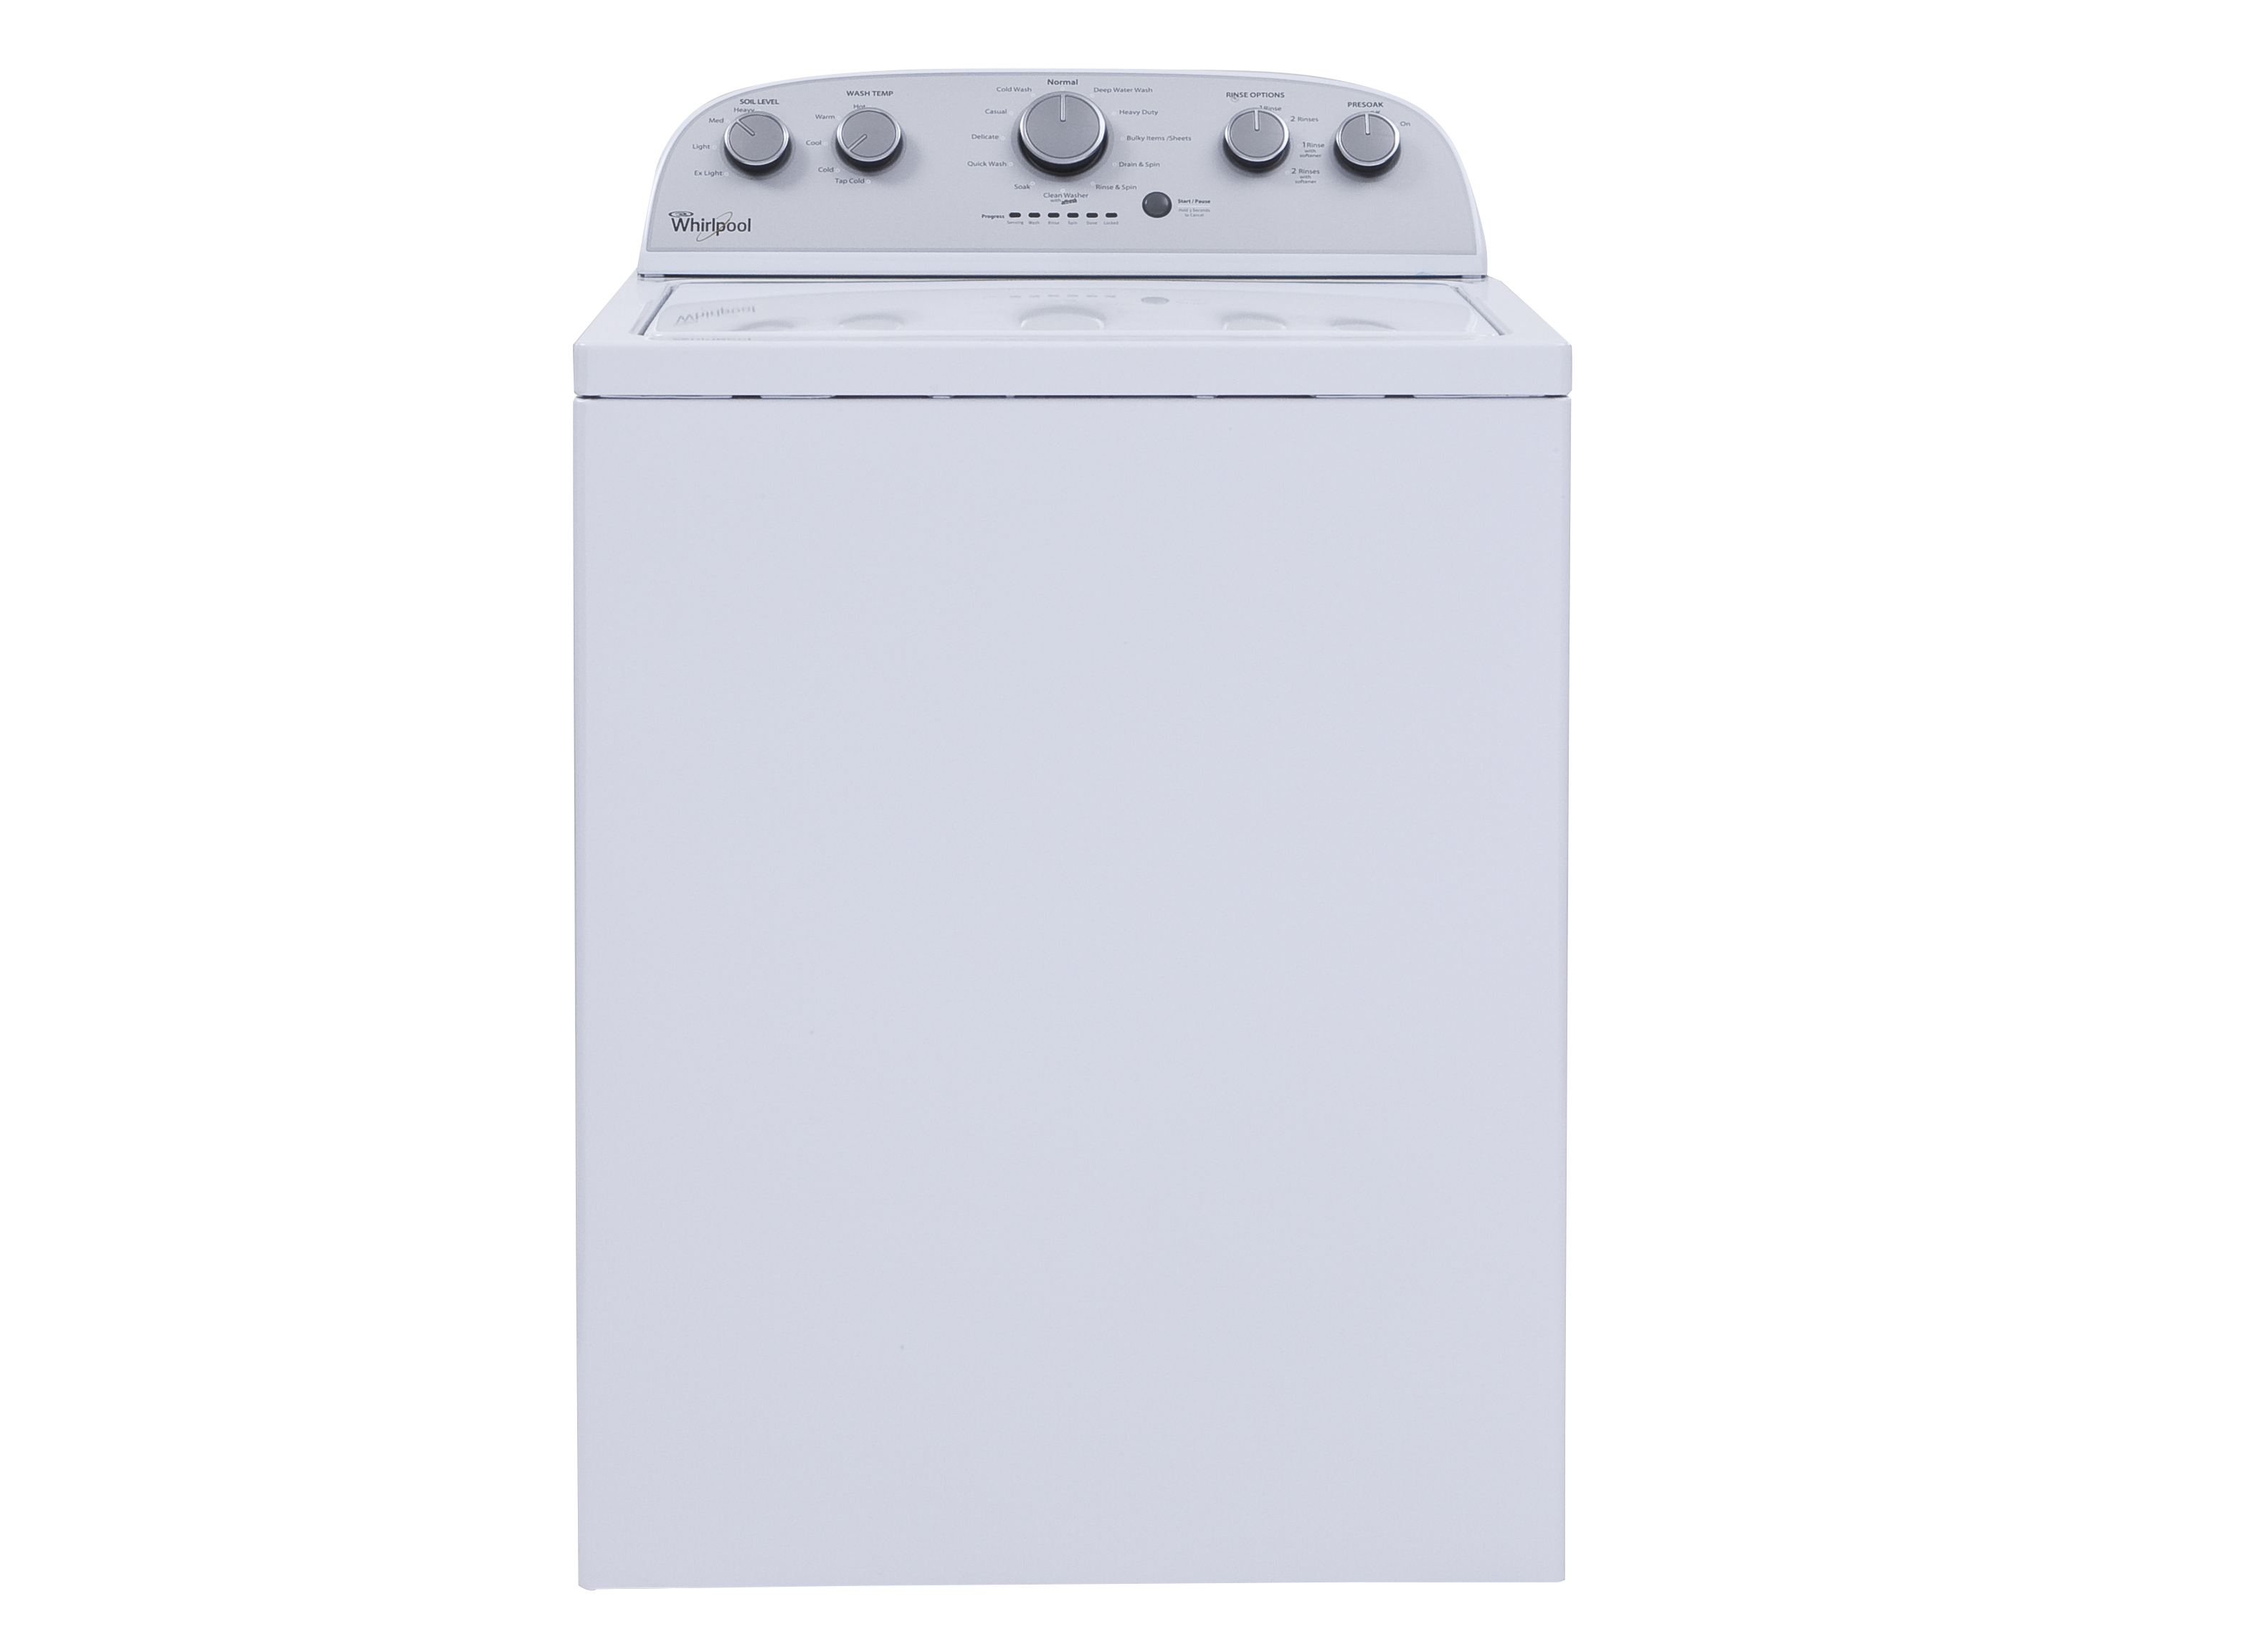 Whirlpool WTW5000DW Washing Machine Review - Consumer Reports